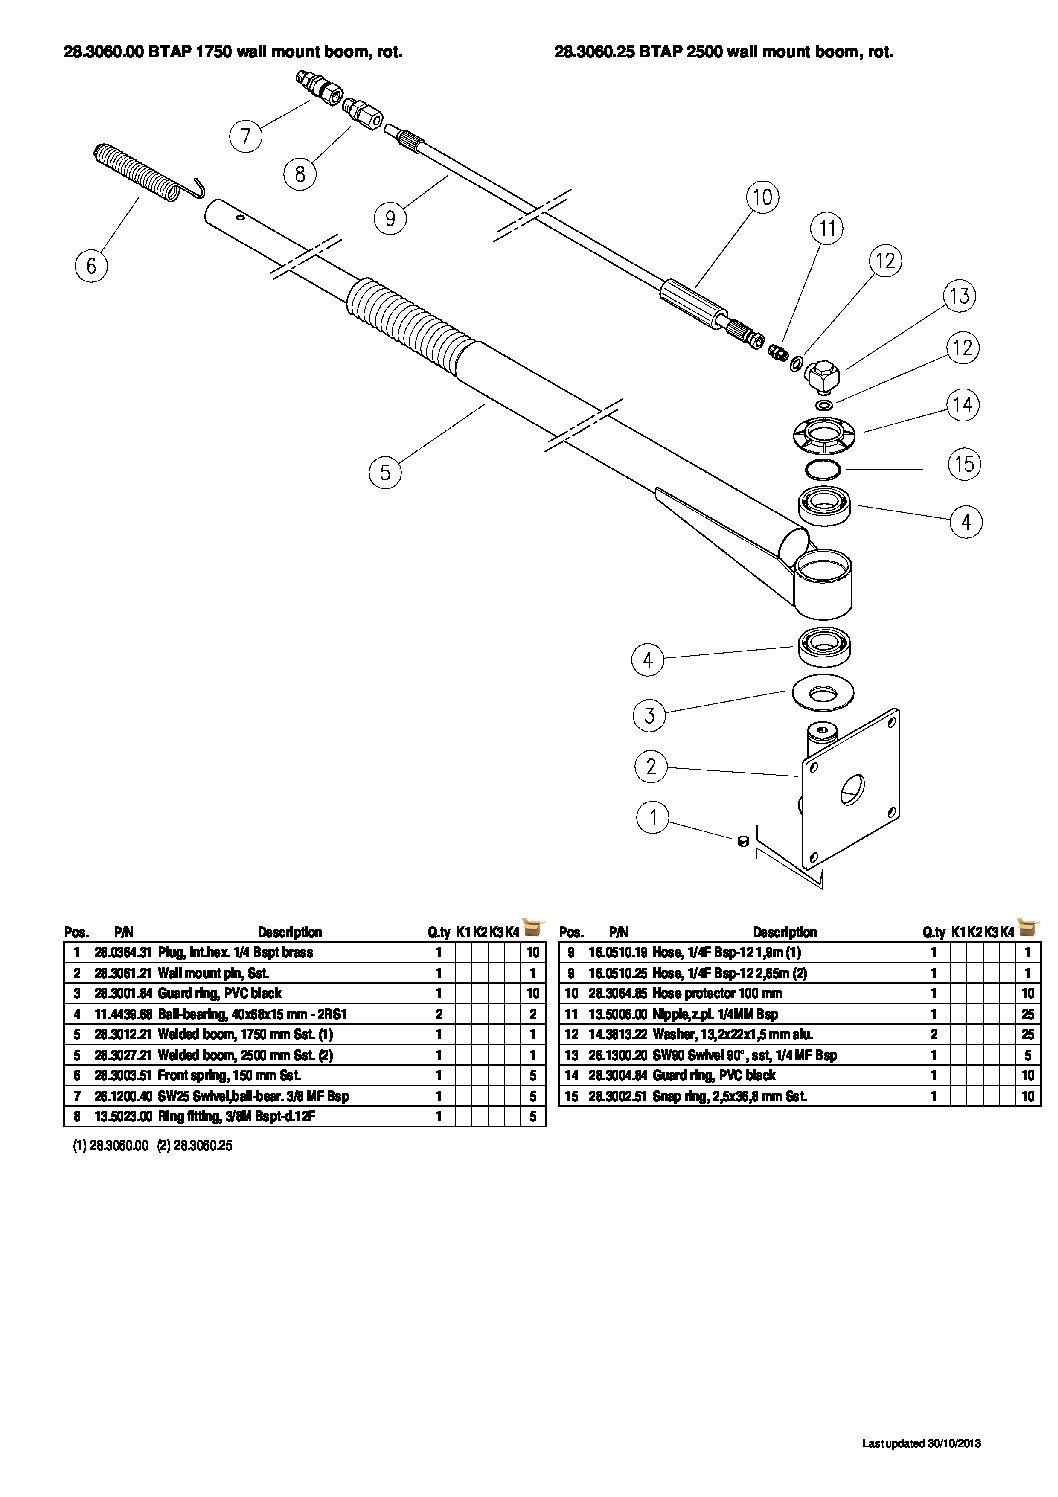 PA Wall Mounted Ceiling Boom parts breakdown